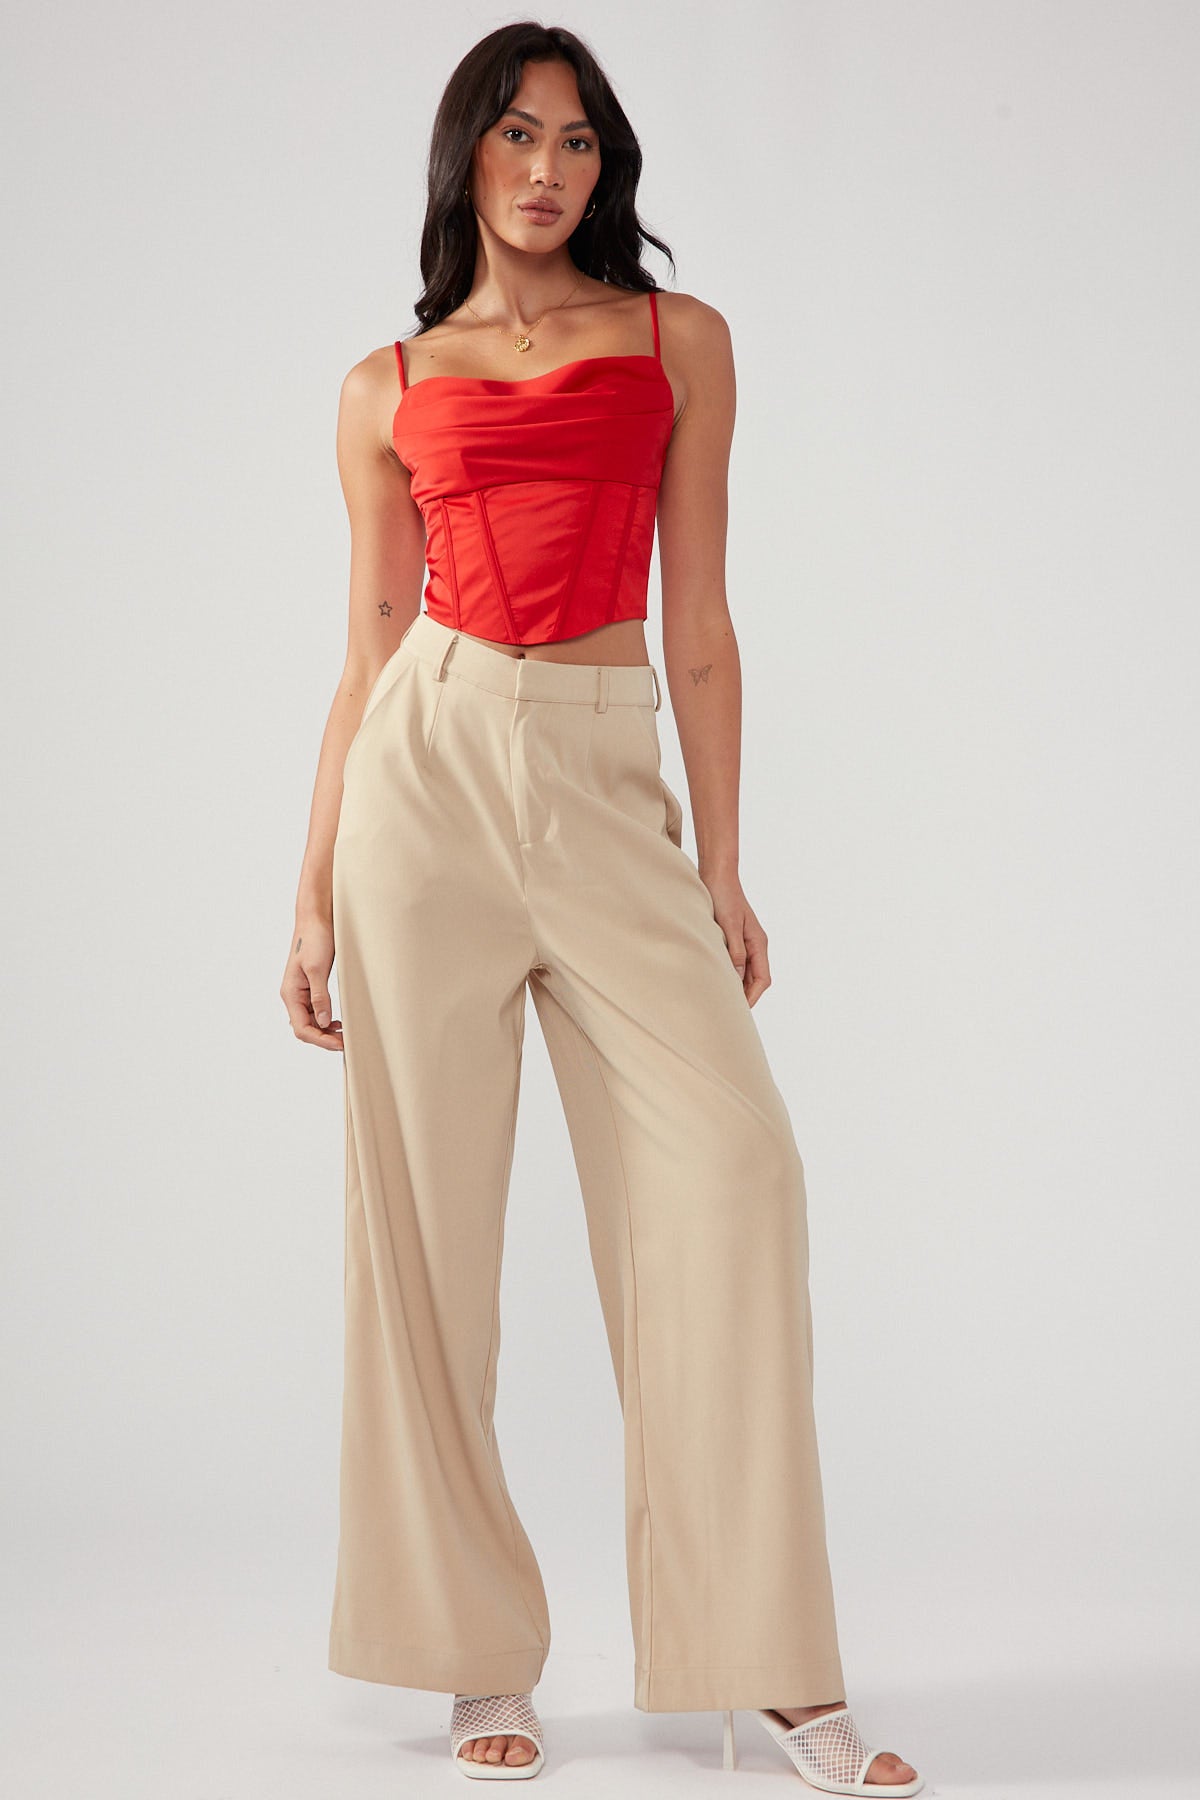 Perfect Stranger Cowl Neck Corset Top Red